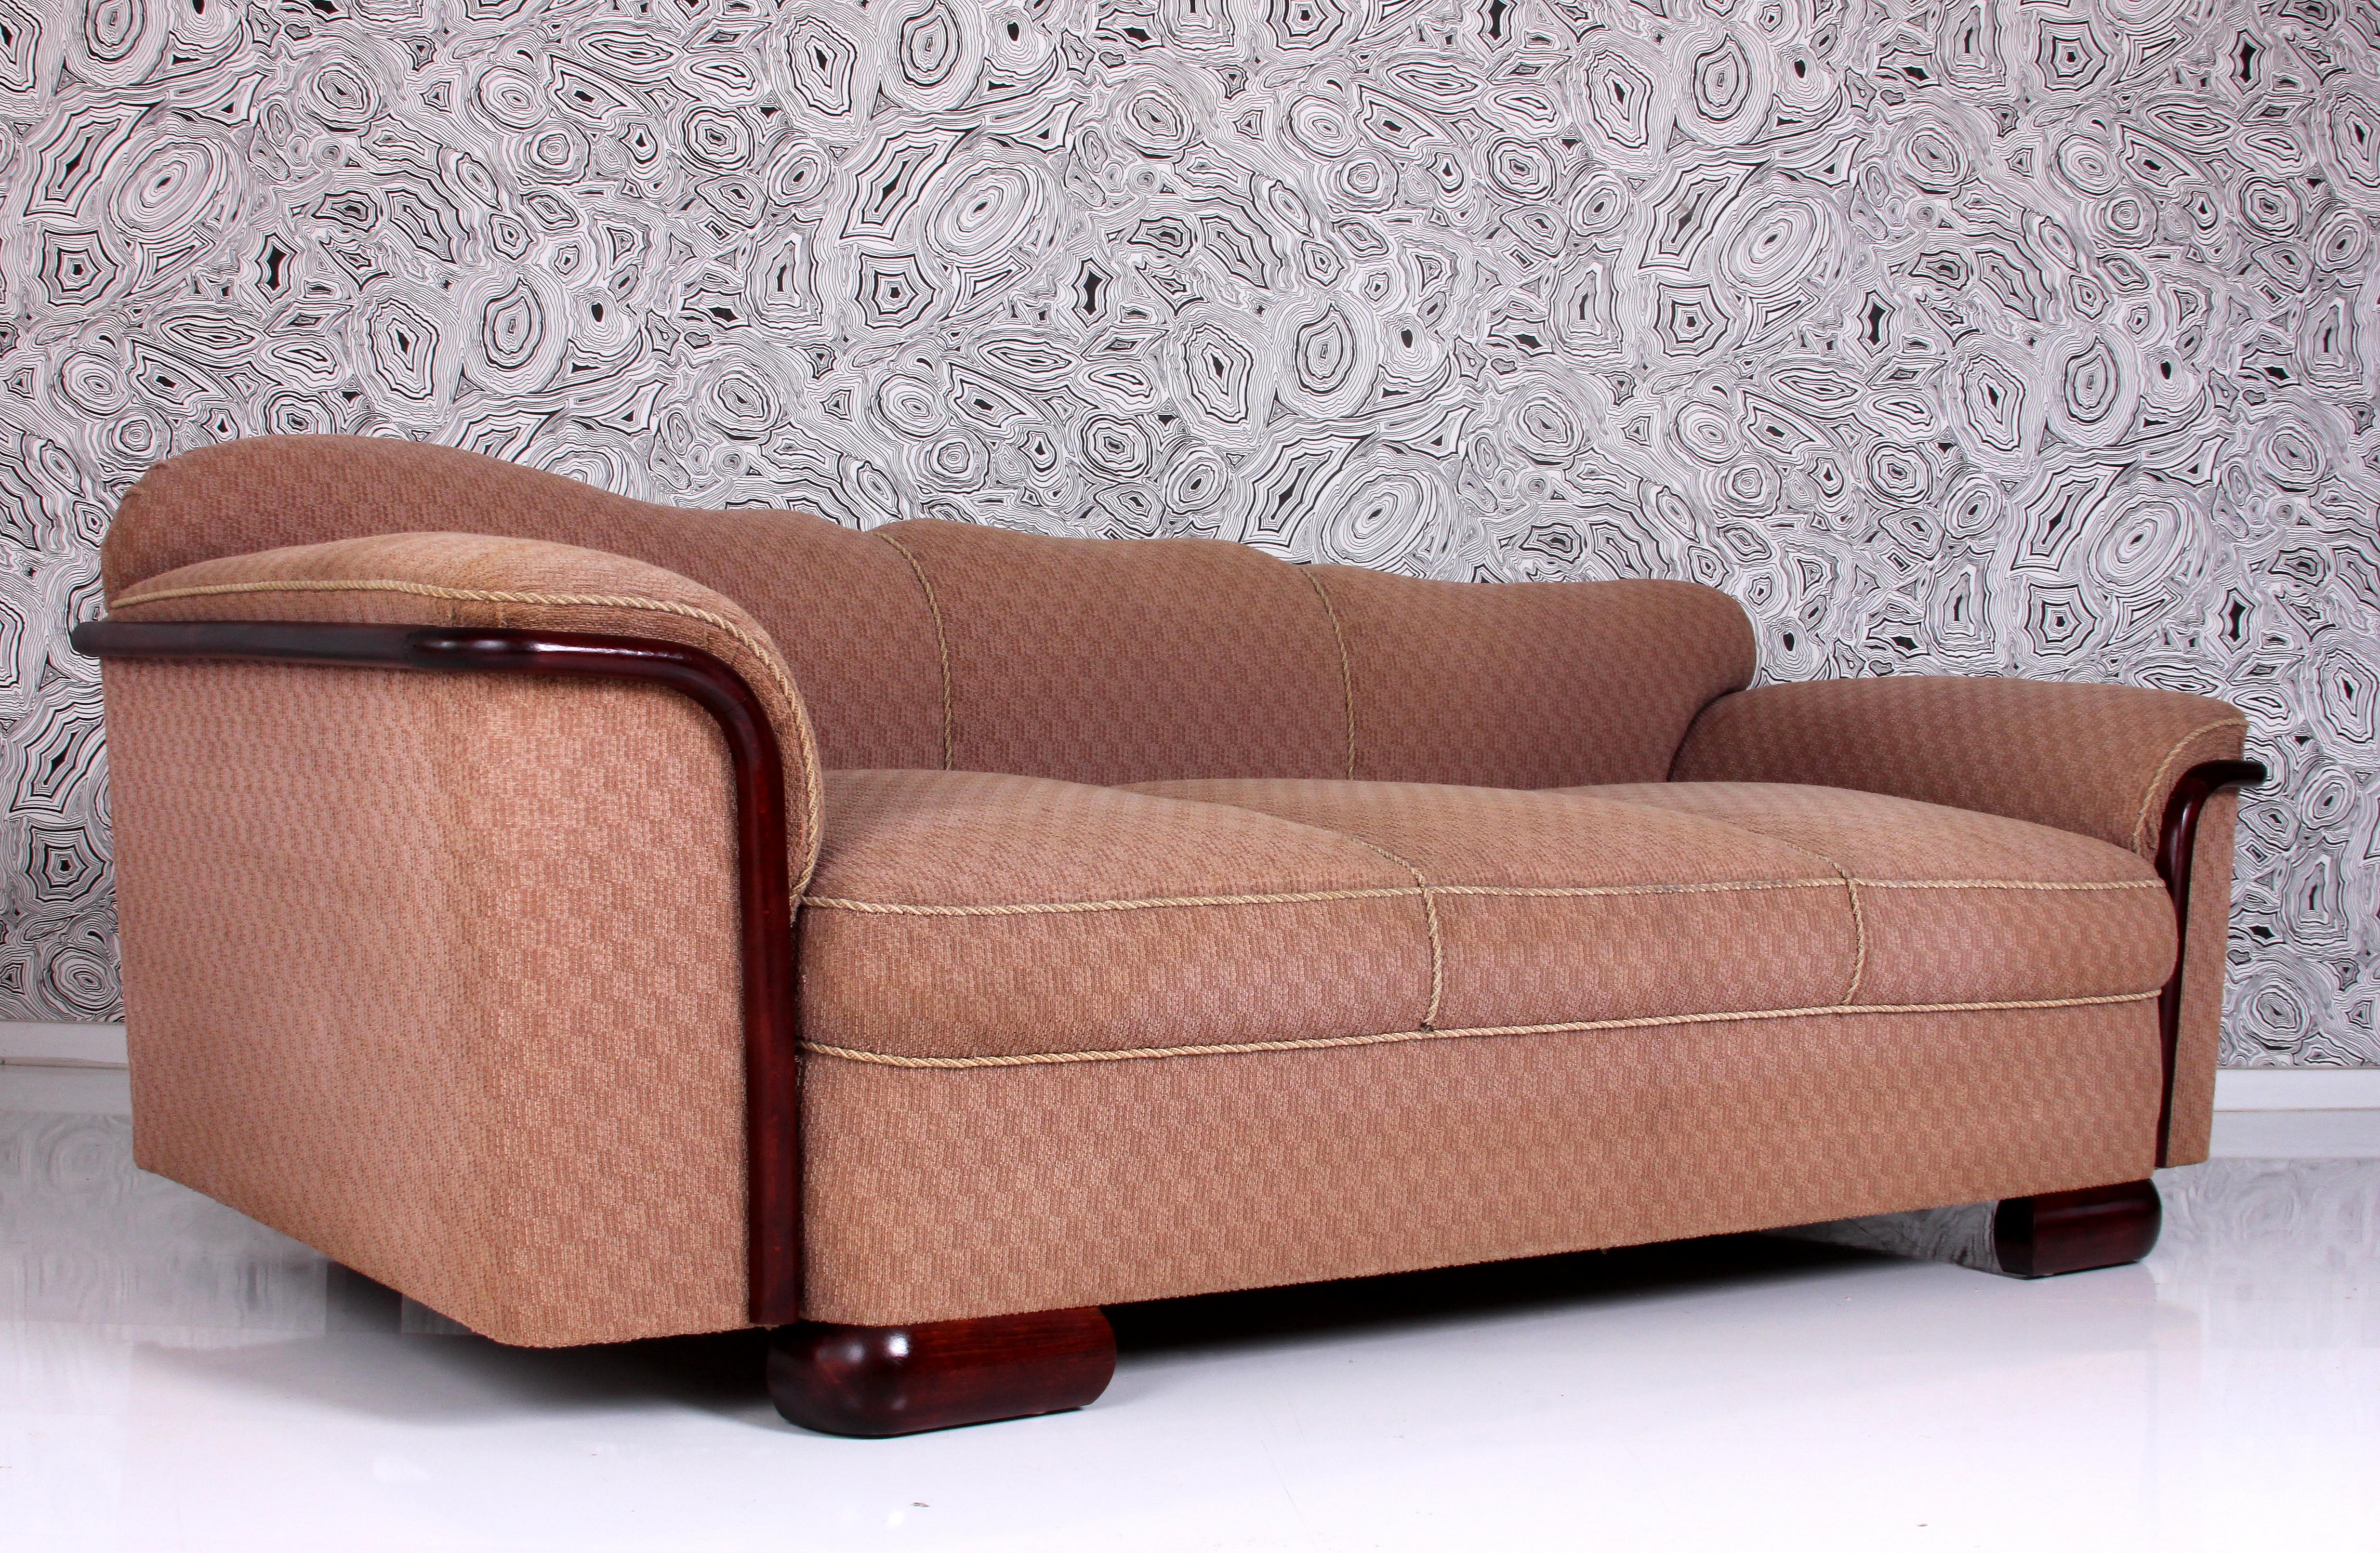 German STRAIGHT classic art deco SOFA Dresden around 1930 or. fabric - wood refinished  For Sale